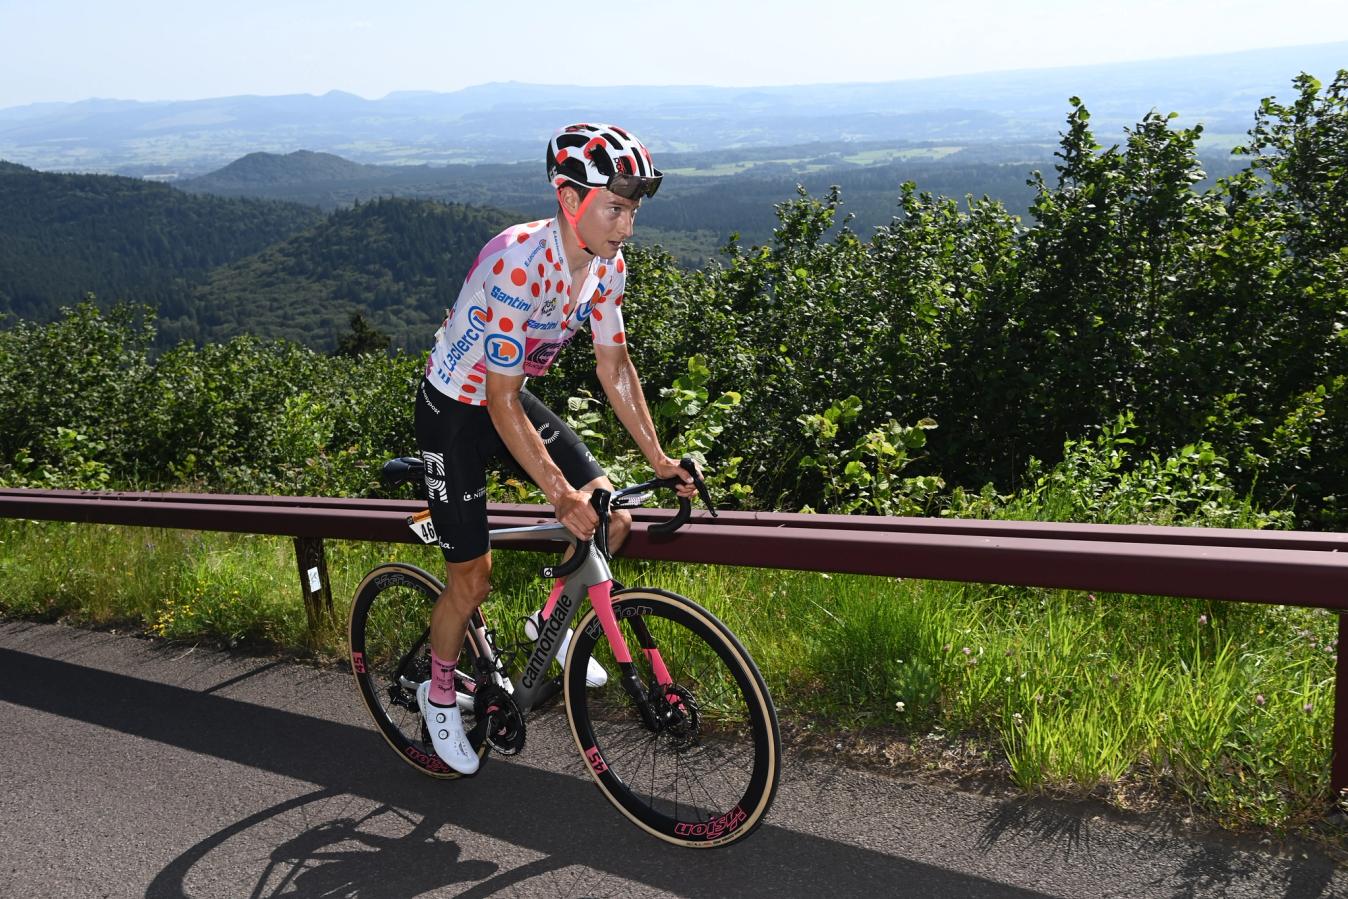 Neilson Powless has been one of the most visible riders of the Tour de France, often attacking in search of KoM points